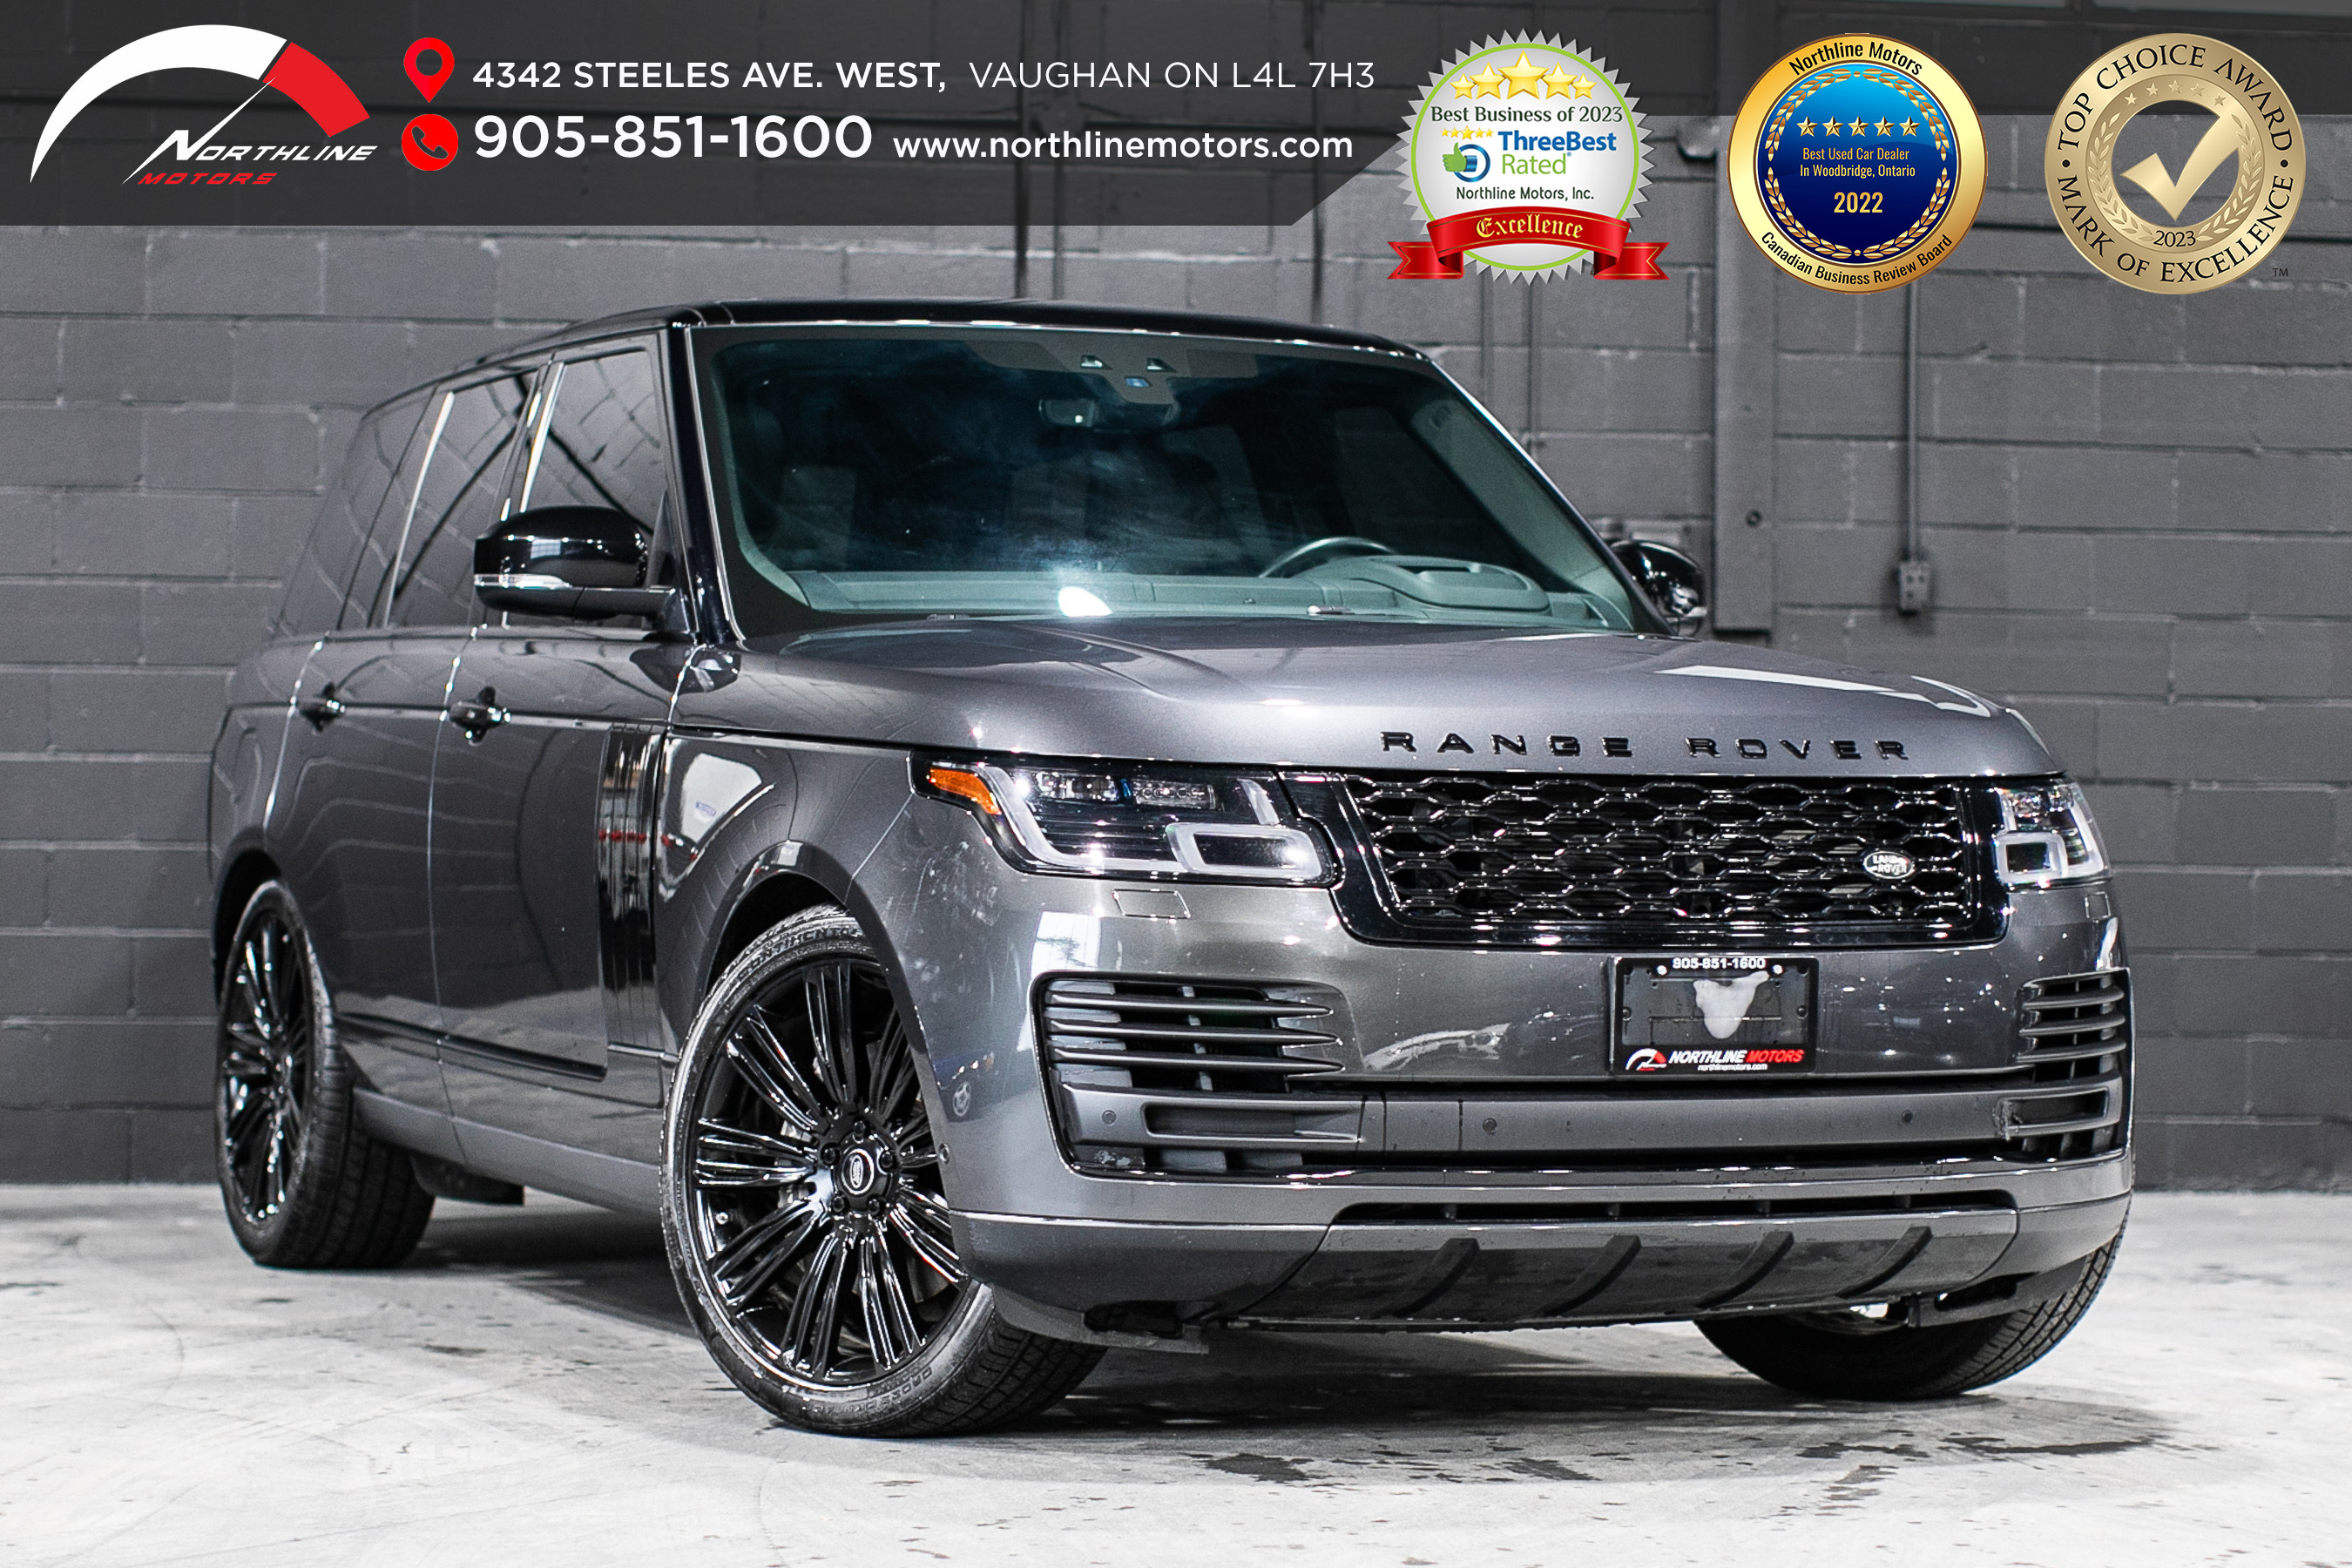 2018 Land Rover Range Rover Supercharged/HUD/MERIDIAN/PANO/22 IN RIMS/CAM/NAV